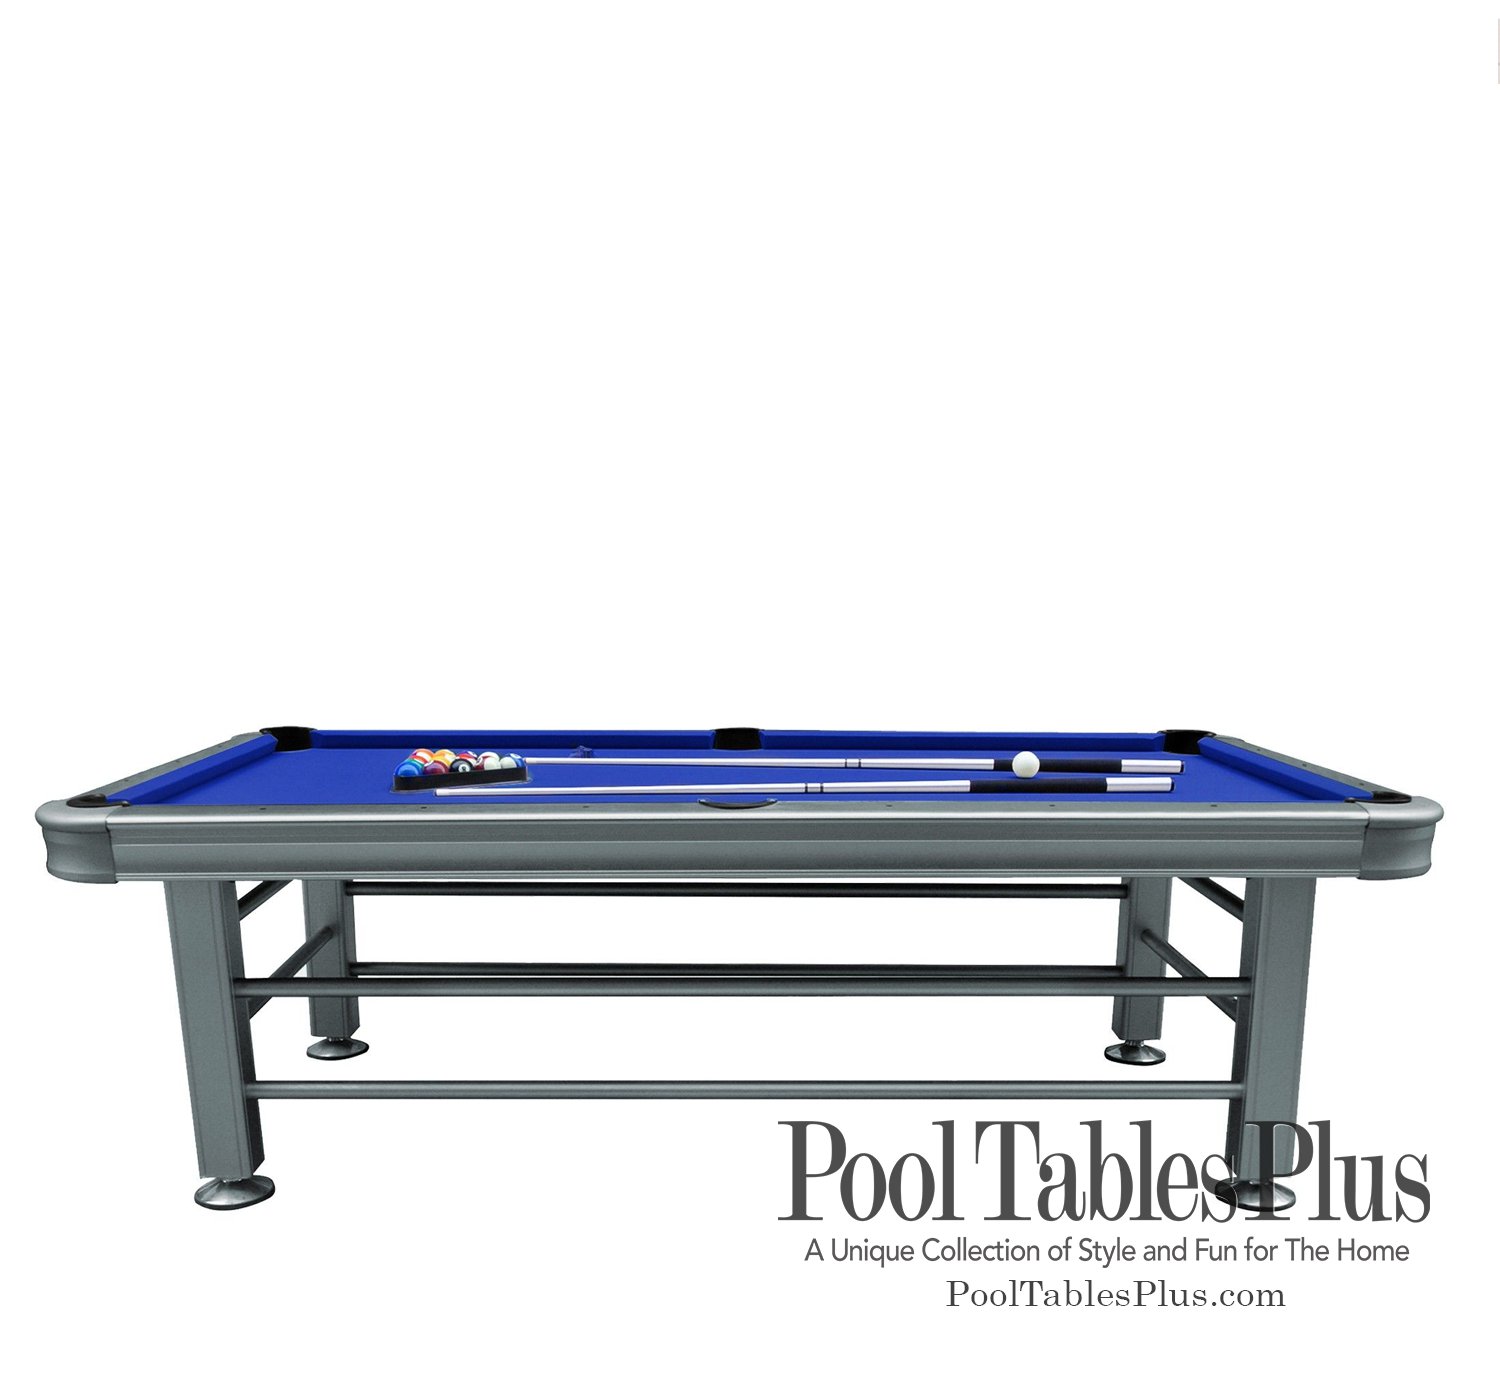 Air King Cyclone 7ft Slate Bed Pool Table Walker & Simpson Captain 